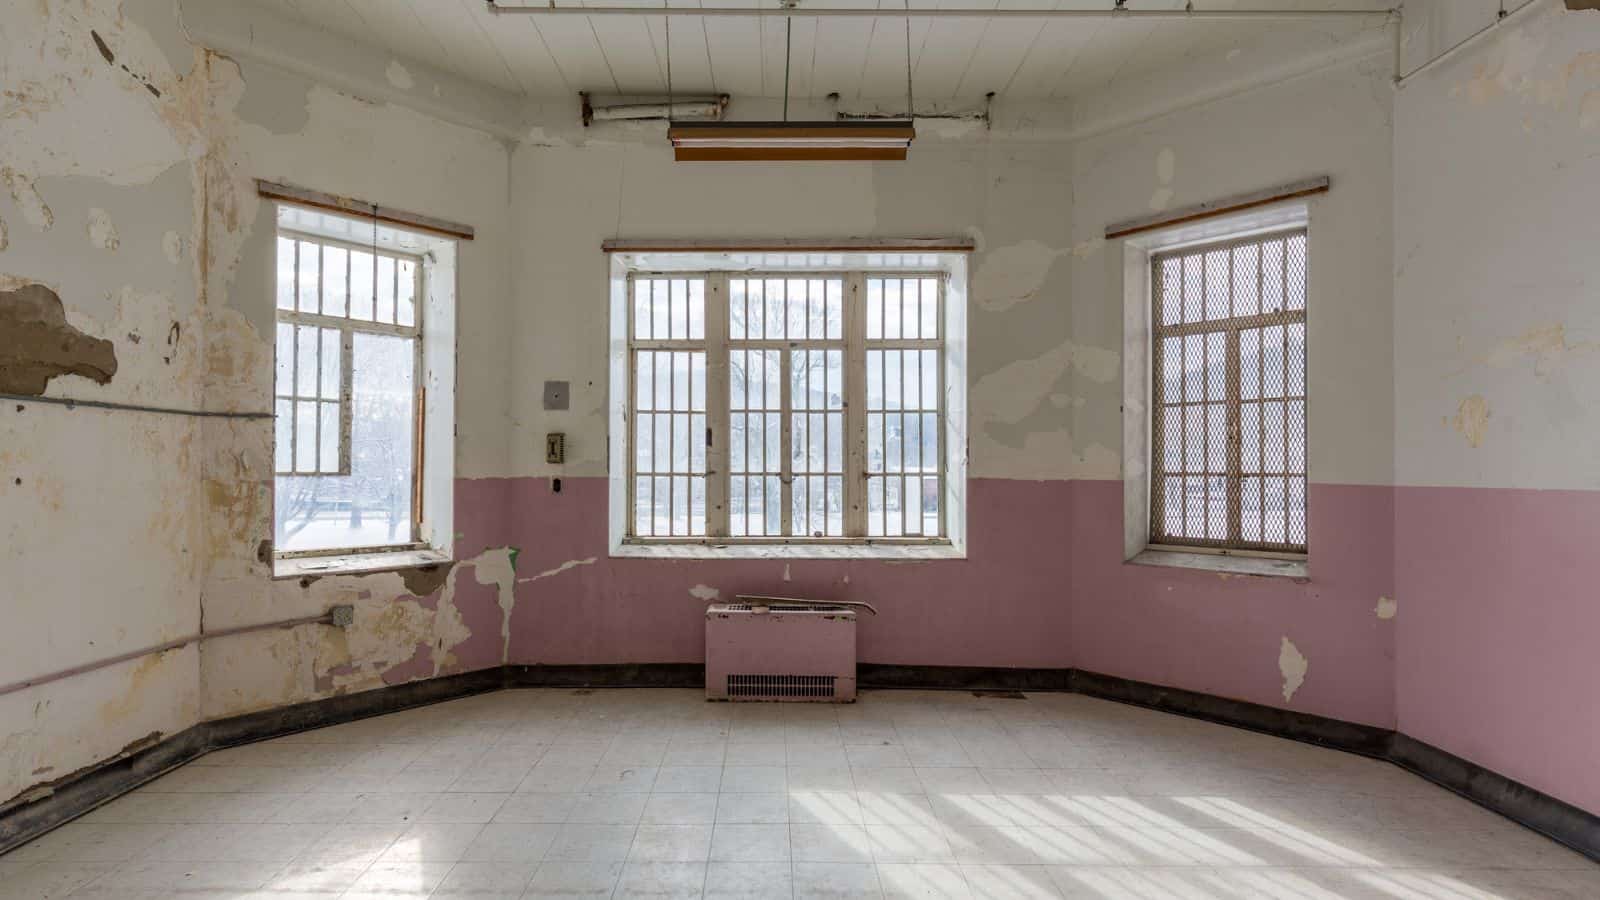 <p><span>This </span><a href="https://trans-alleghenylunaticasylum.com/#:~:text=This%20National%20Historic%20Landmark%20served,lives%20of%20the%20mentally%20ill."><span>National Historic Landmark</span></a><span> has been a sanctuary for the mentally ill since the mid-1800s. Dive into its rich history – from Civil War raids to a gold robbery. Its architecture was believed to have “curative” effects.</span></p><p><span>“Asylum” is another word for ‘place where you can blame the wind for your sudden goosebumps.’ Visitors claim that, in this abode, silence is a language, and the walls talk back. However, Douglas, a resident of West Virginia, argues via Quora, “</span><i><span>There are no such things as ghosts. Statistically speaking, if there were, the entire planet would be haunted.</span></i><span>”</span></p>